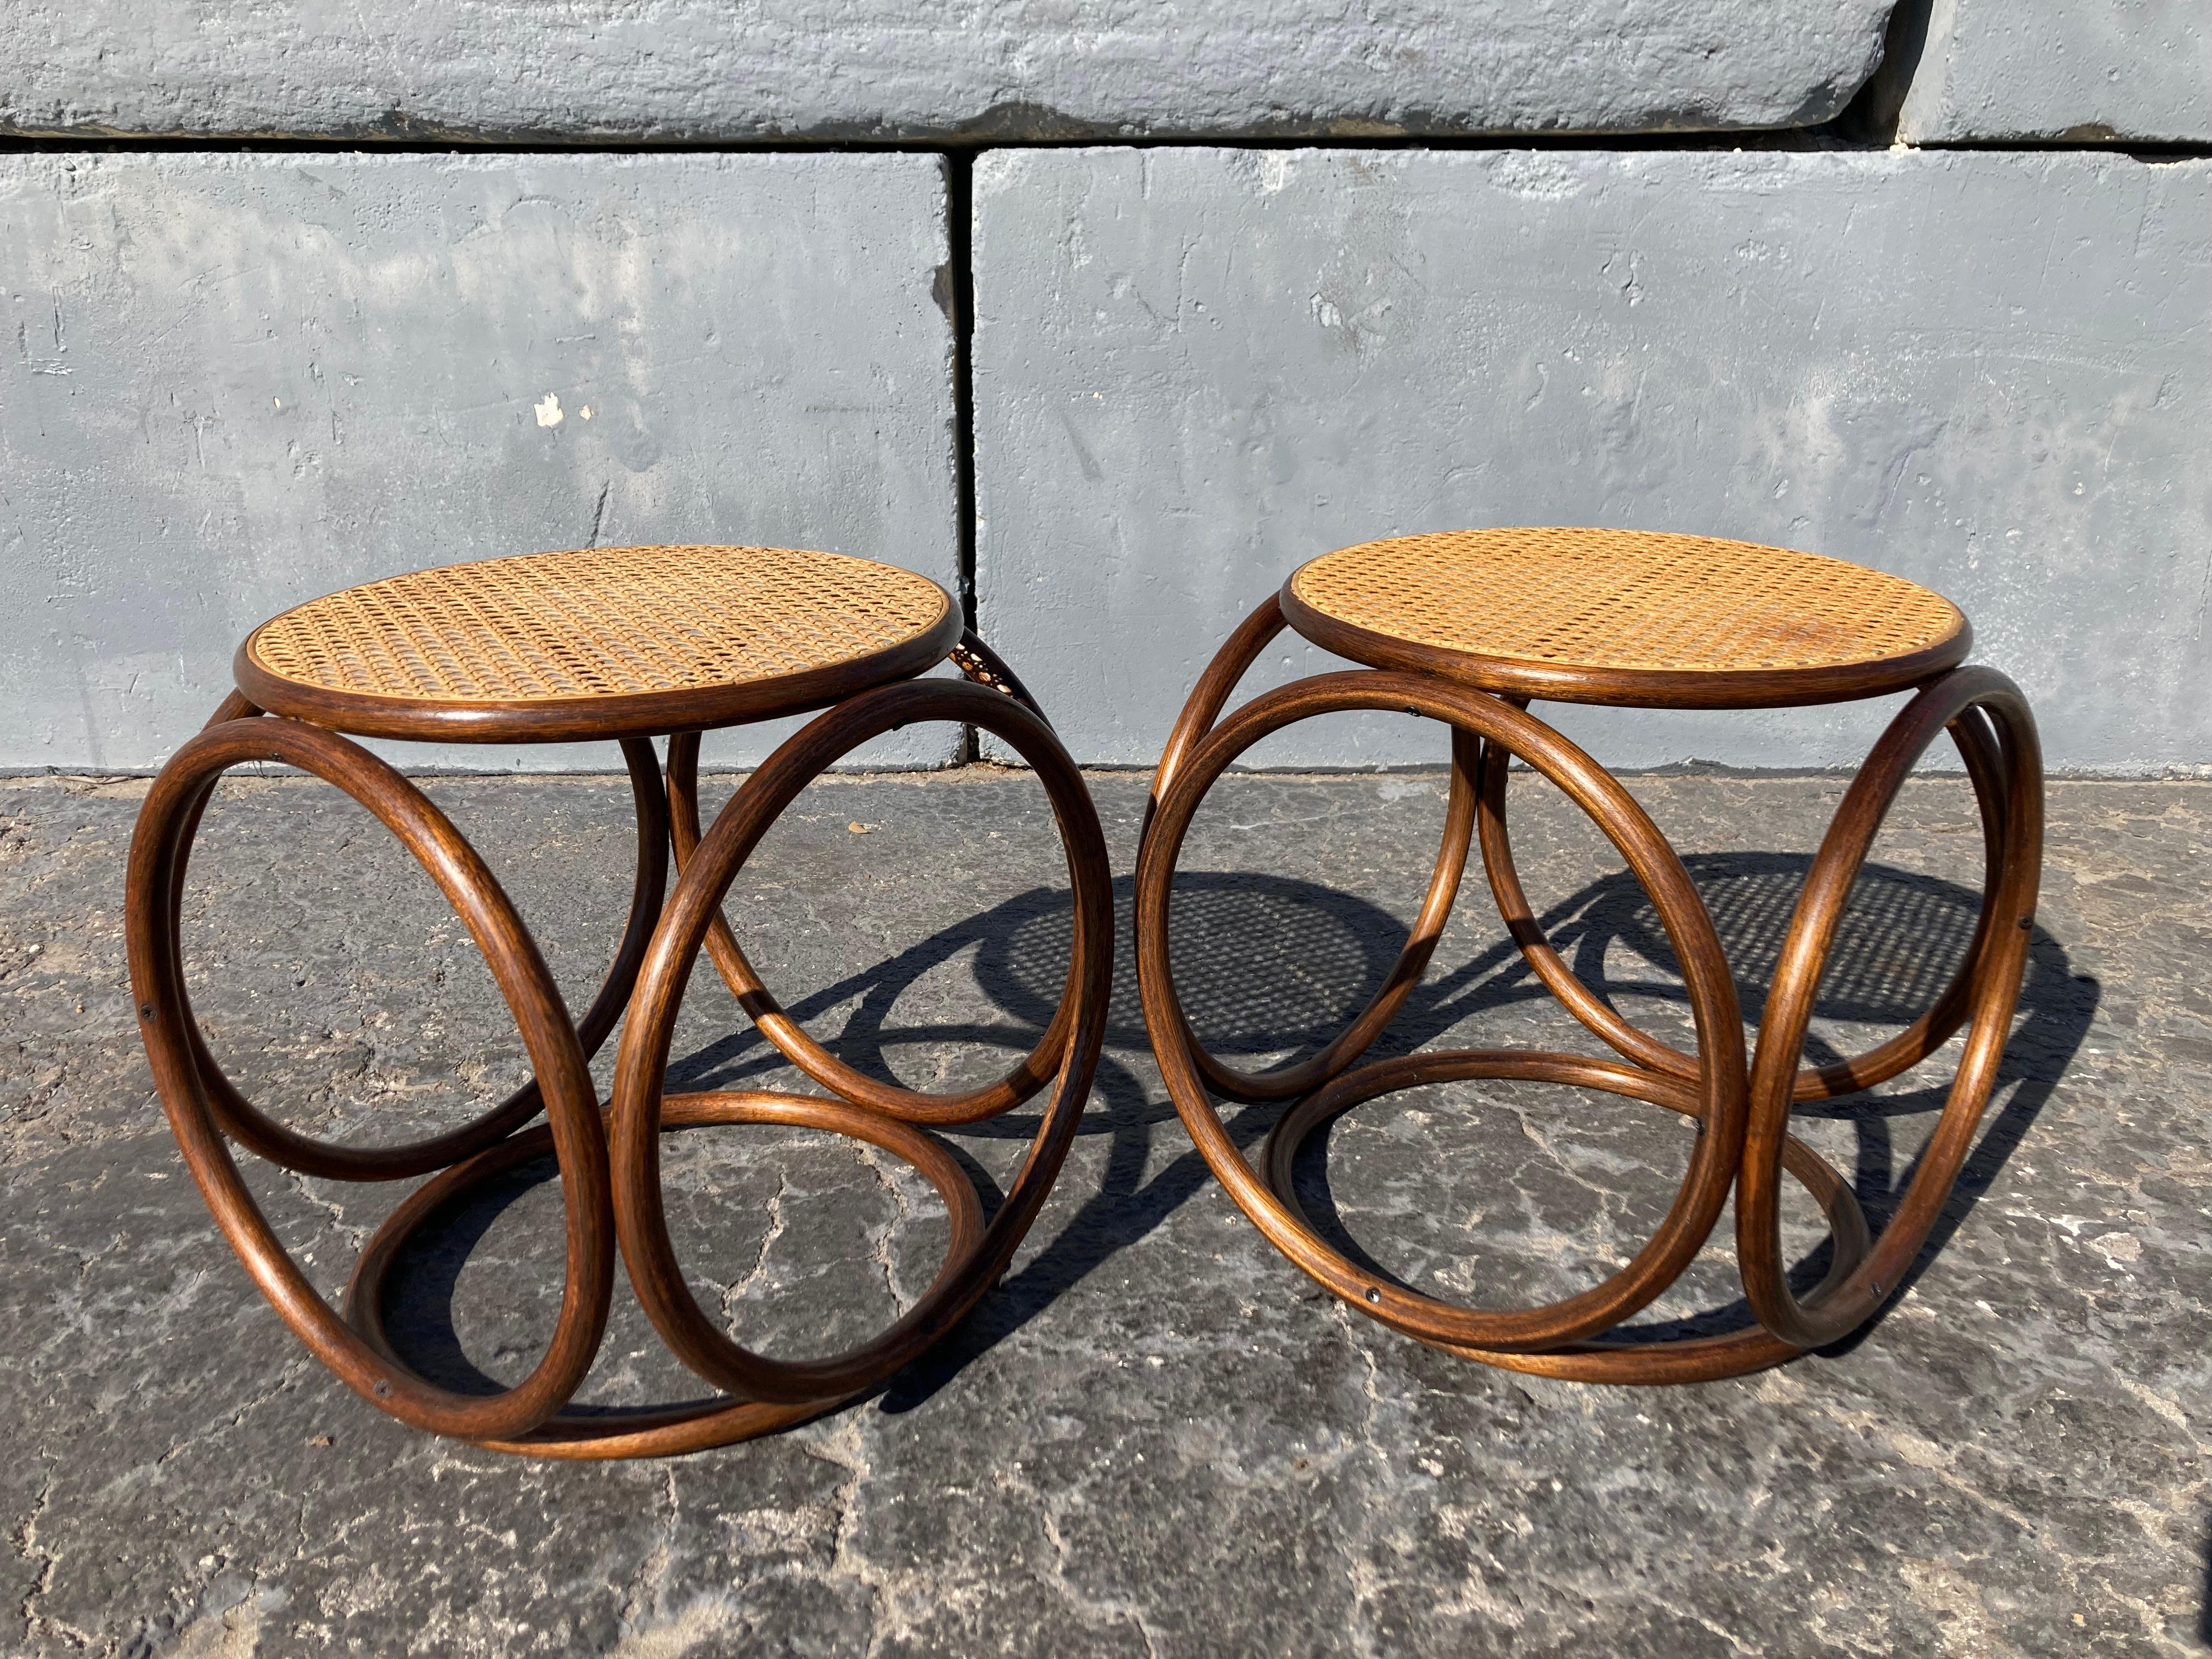 Timeless design, bentwood and cane. Great as stools or side tables.